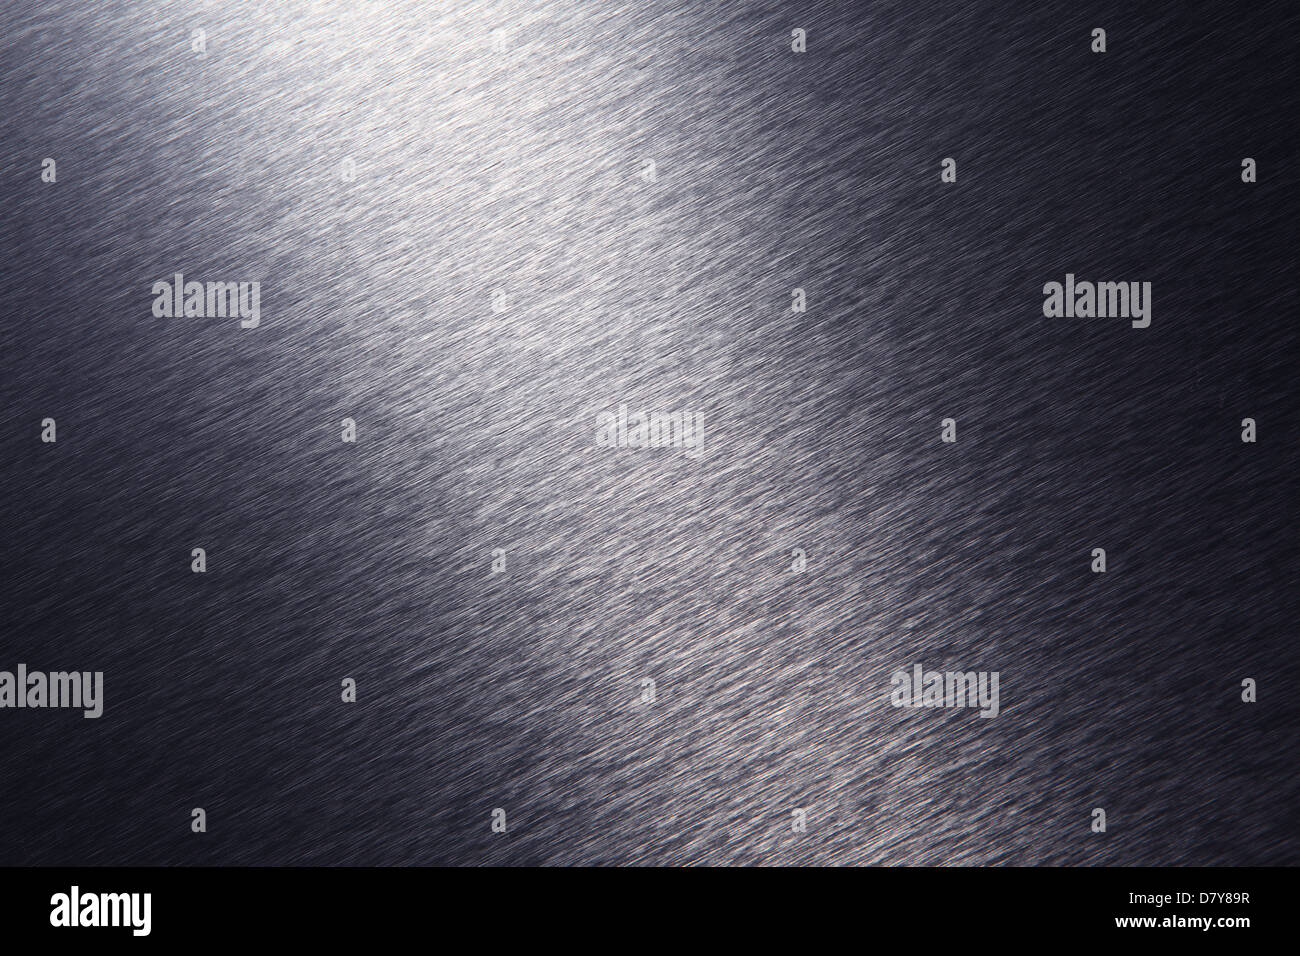 A close-up view of a brushed stainless steel surface with dramatic lighting. Stock Photo